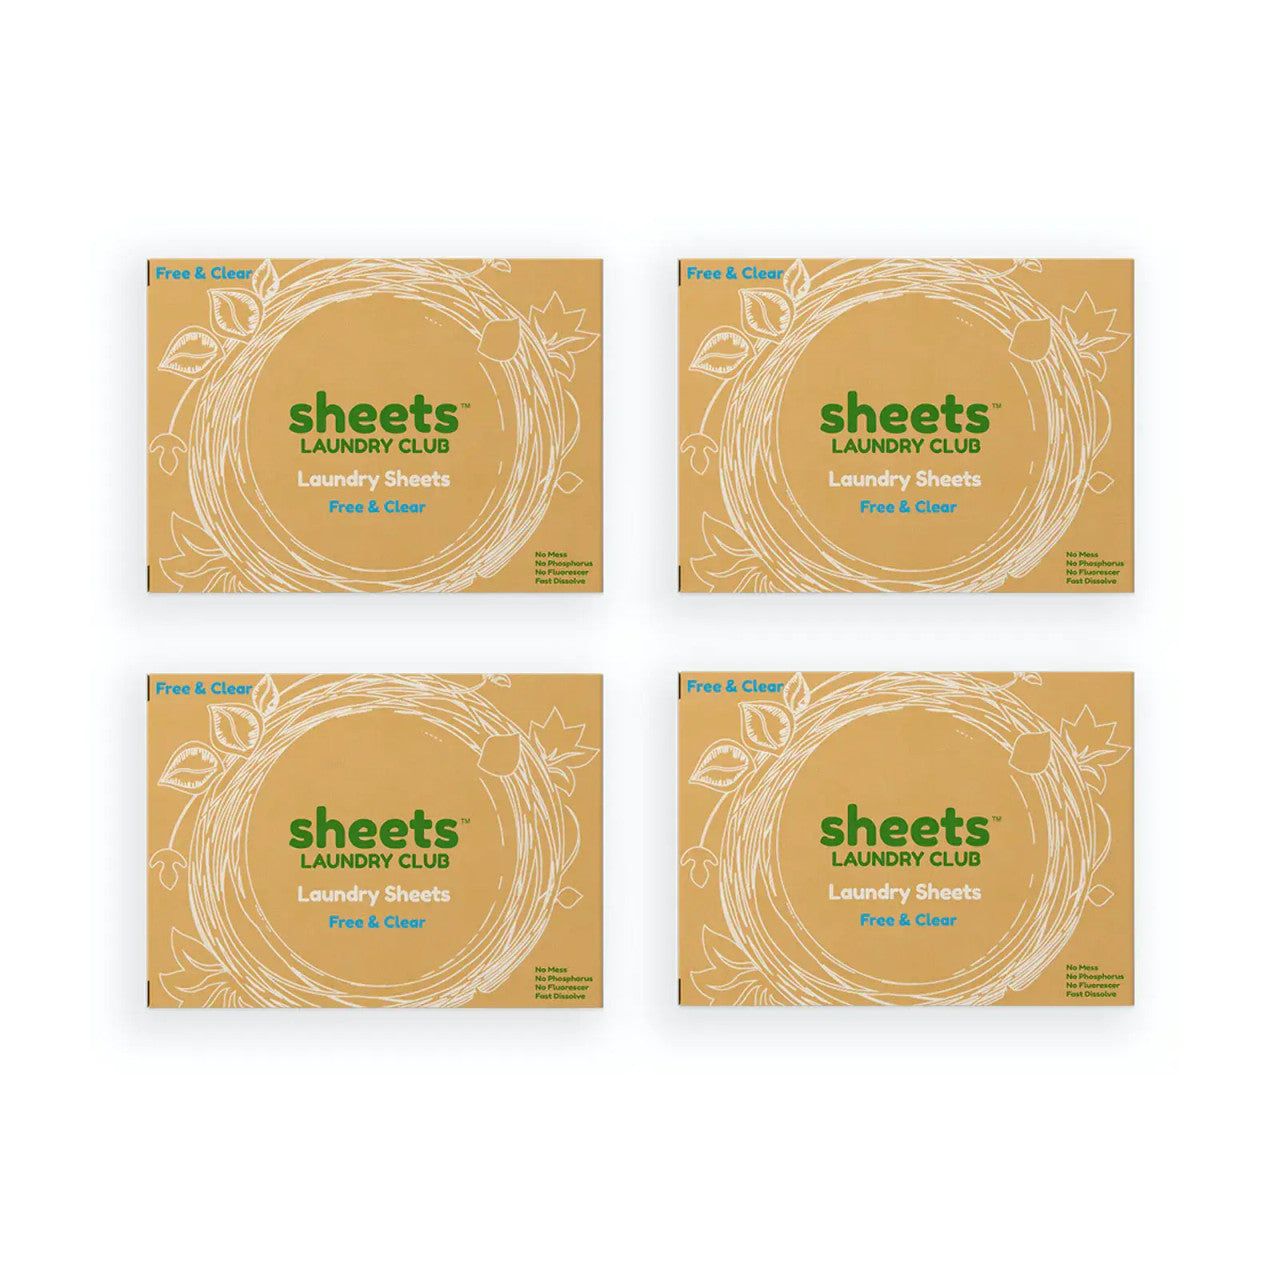 Sheets Laundry Club Laundry Detergent Strips - As Seen on Shark